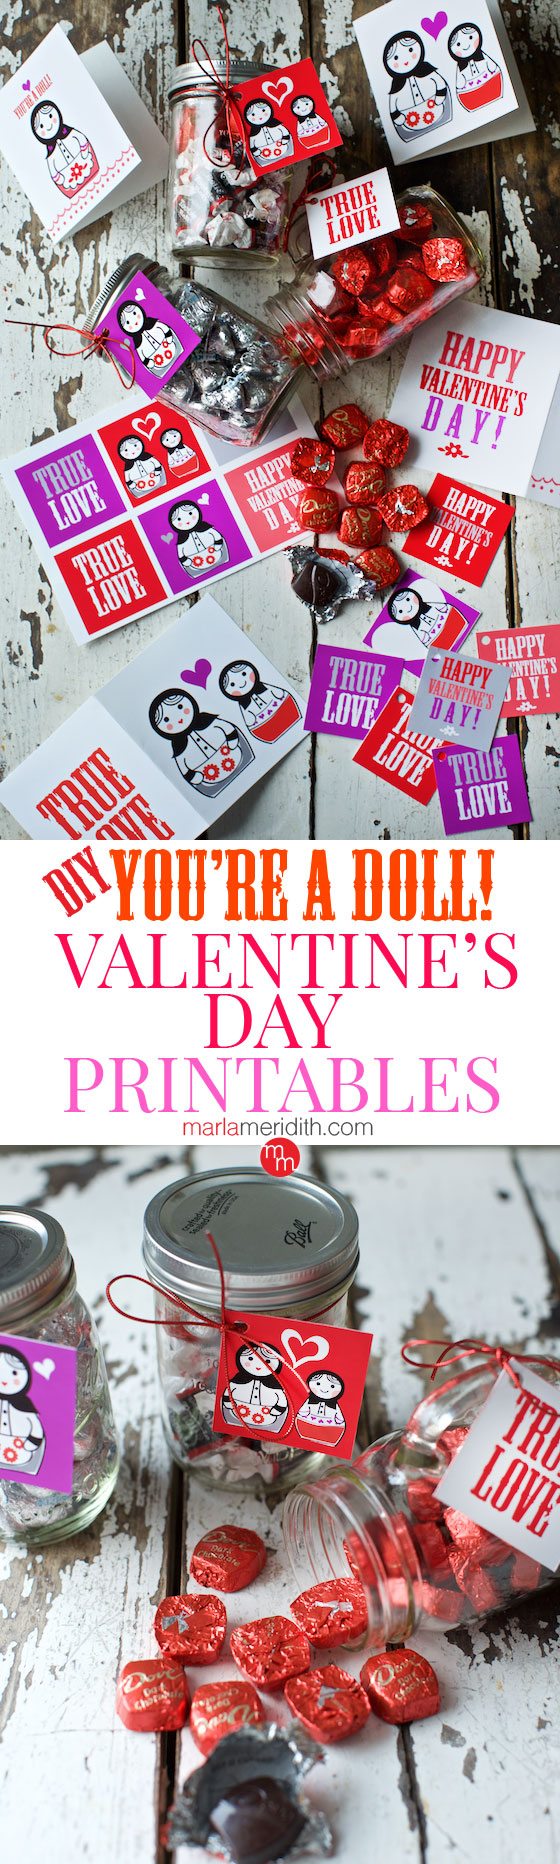 You're a Doll! DIY Valentine's Printables, surprise your loved ones! MarlaMeridith.com ( @marlameridith )